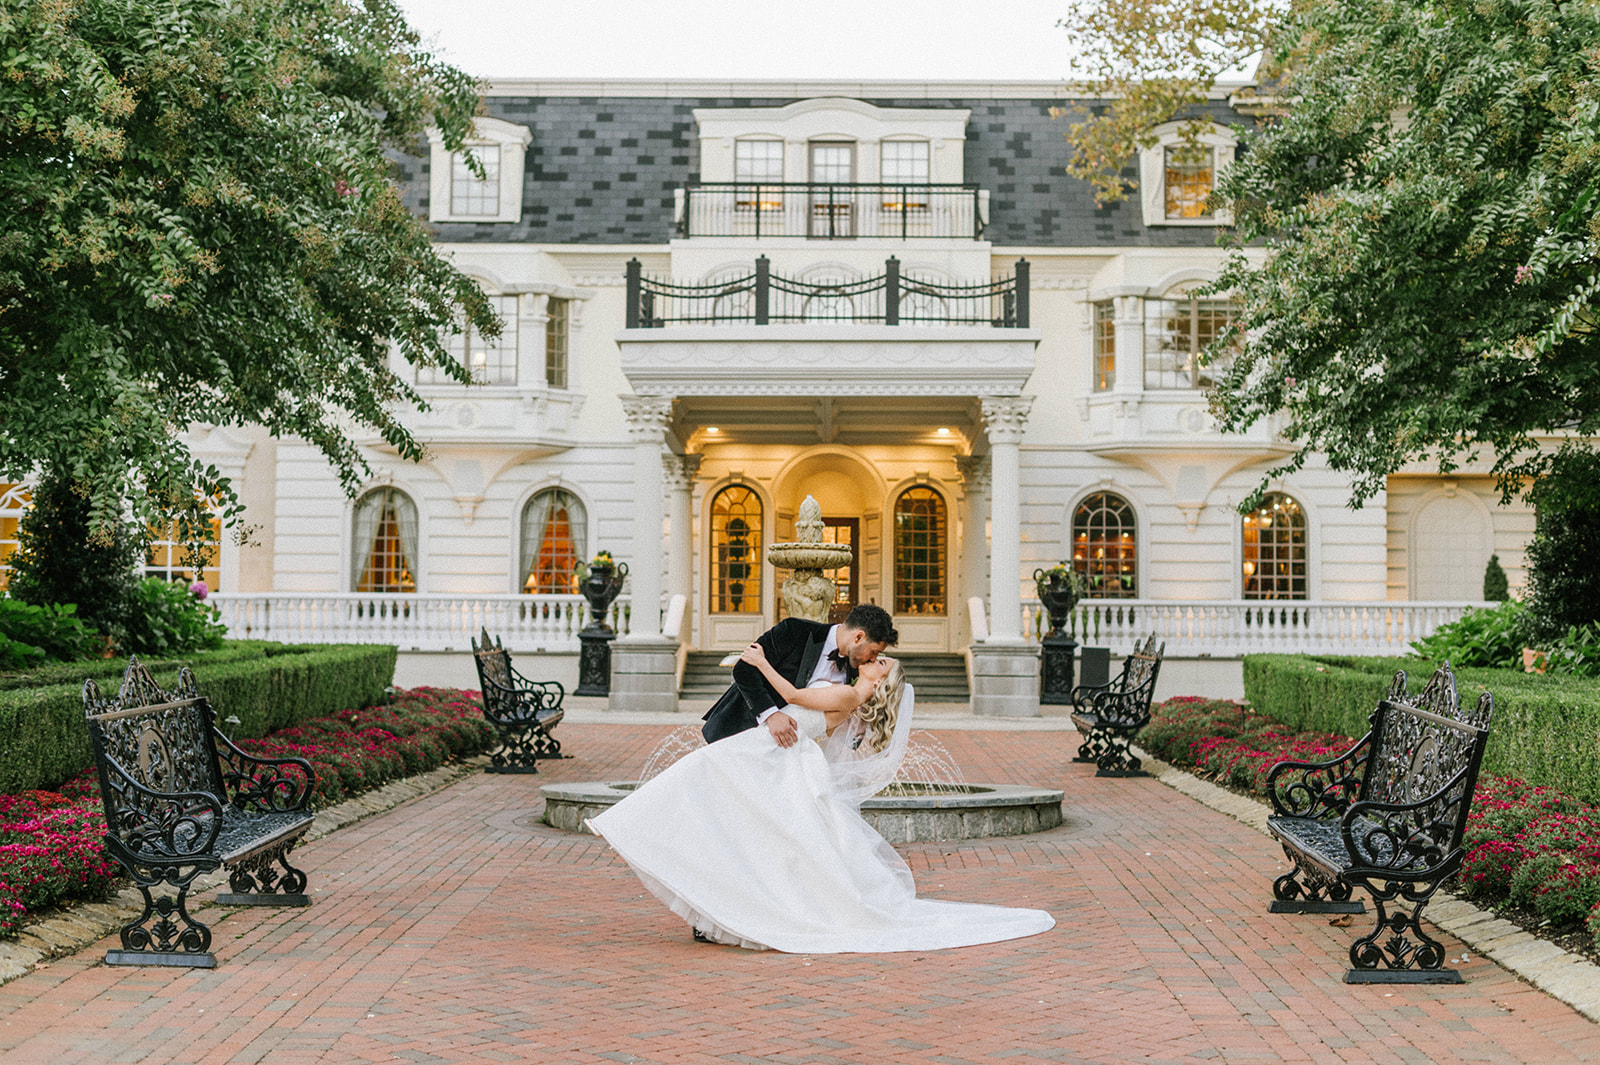 A couple shares a romantic moment at Ashford Estate.